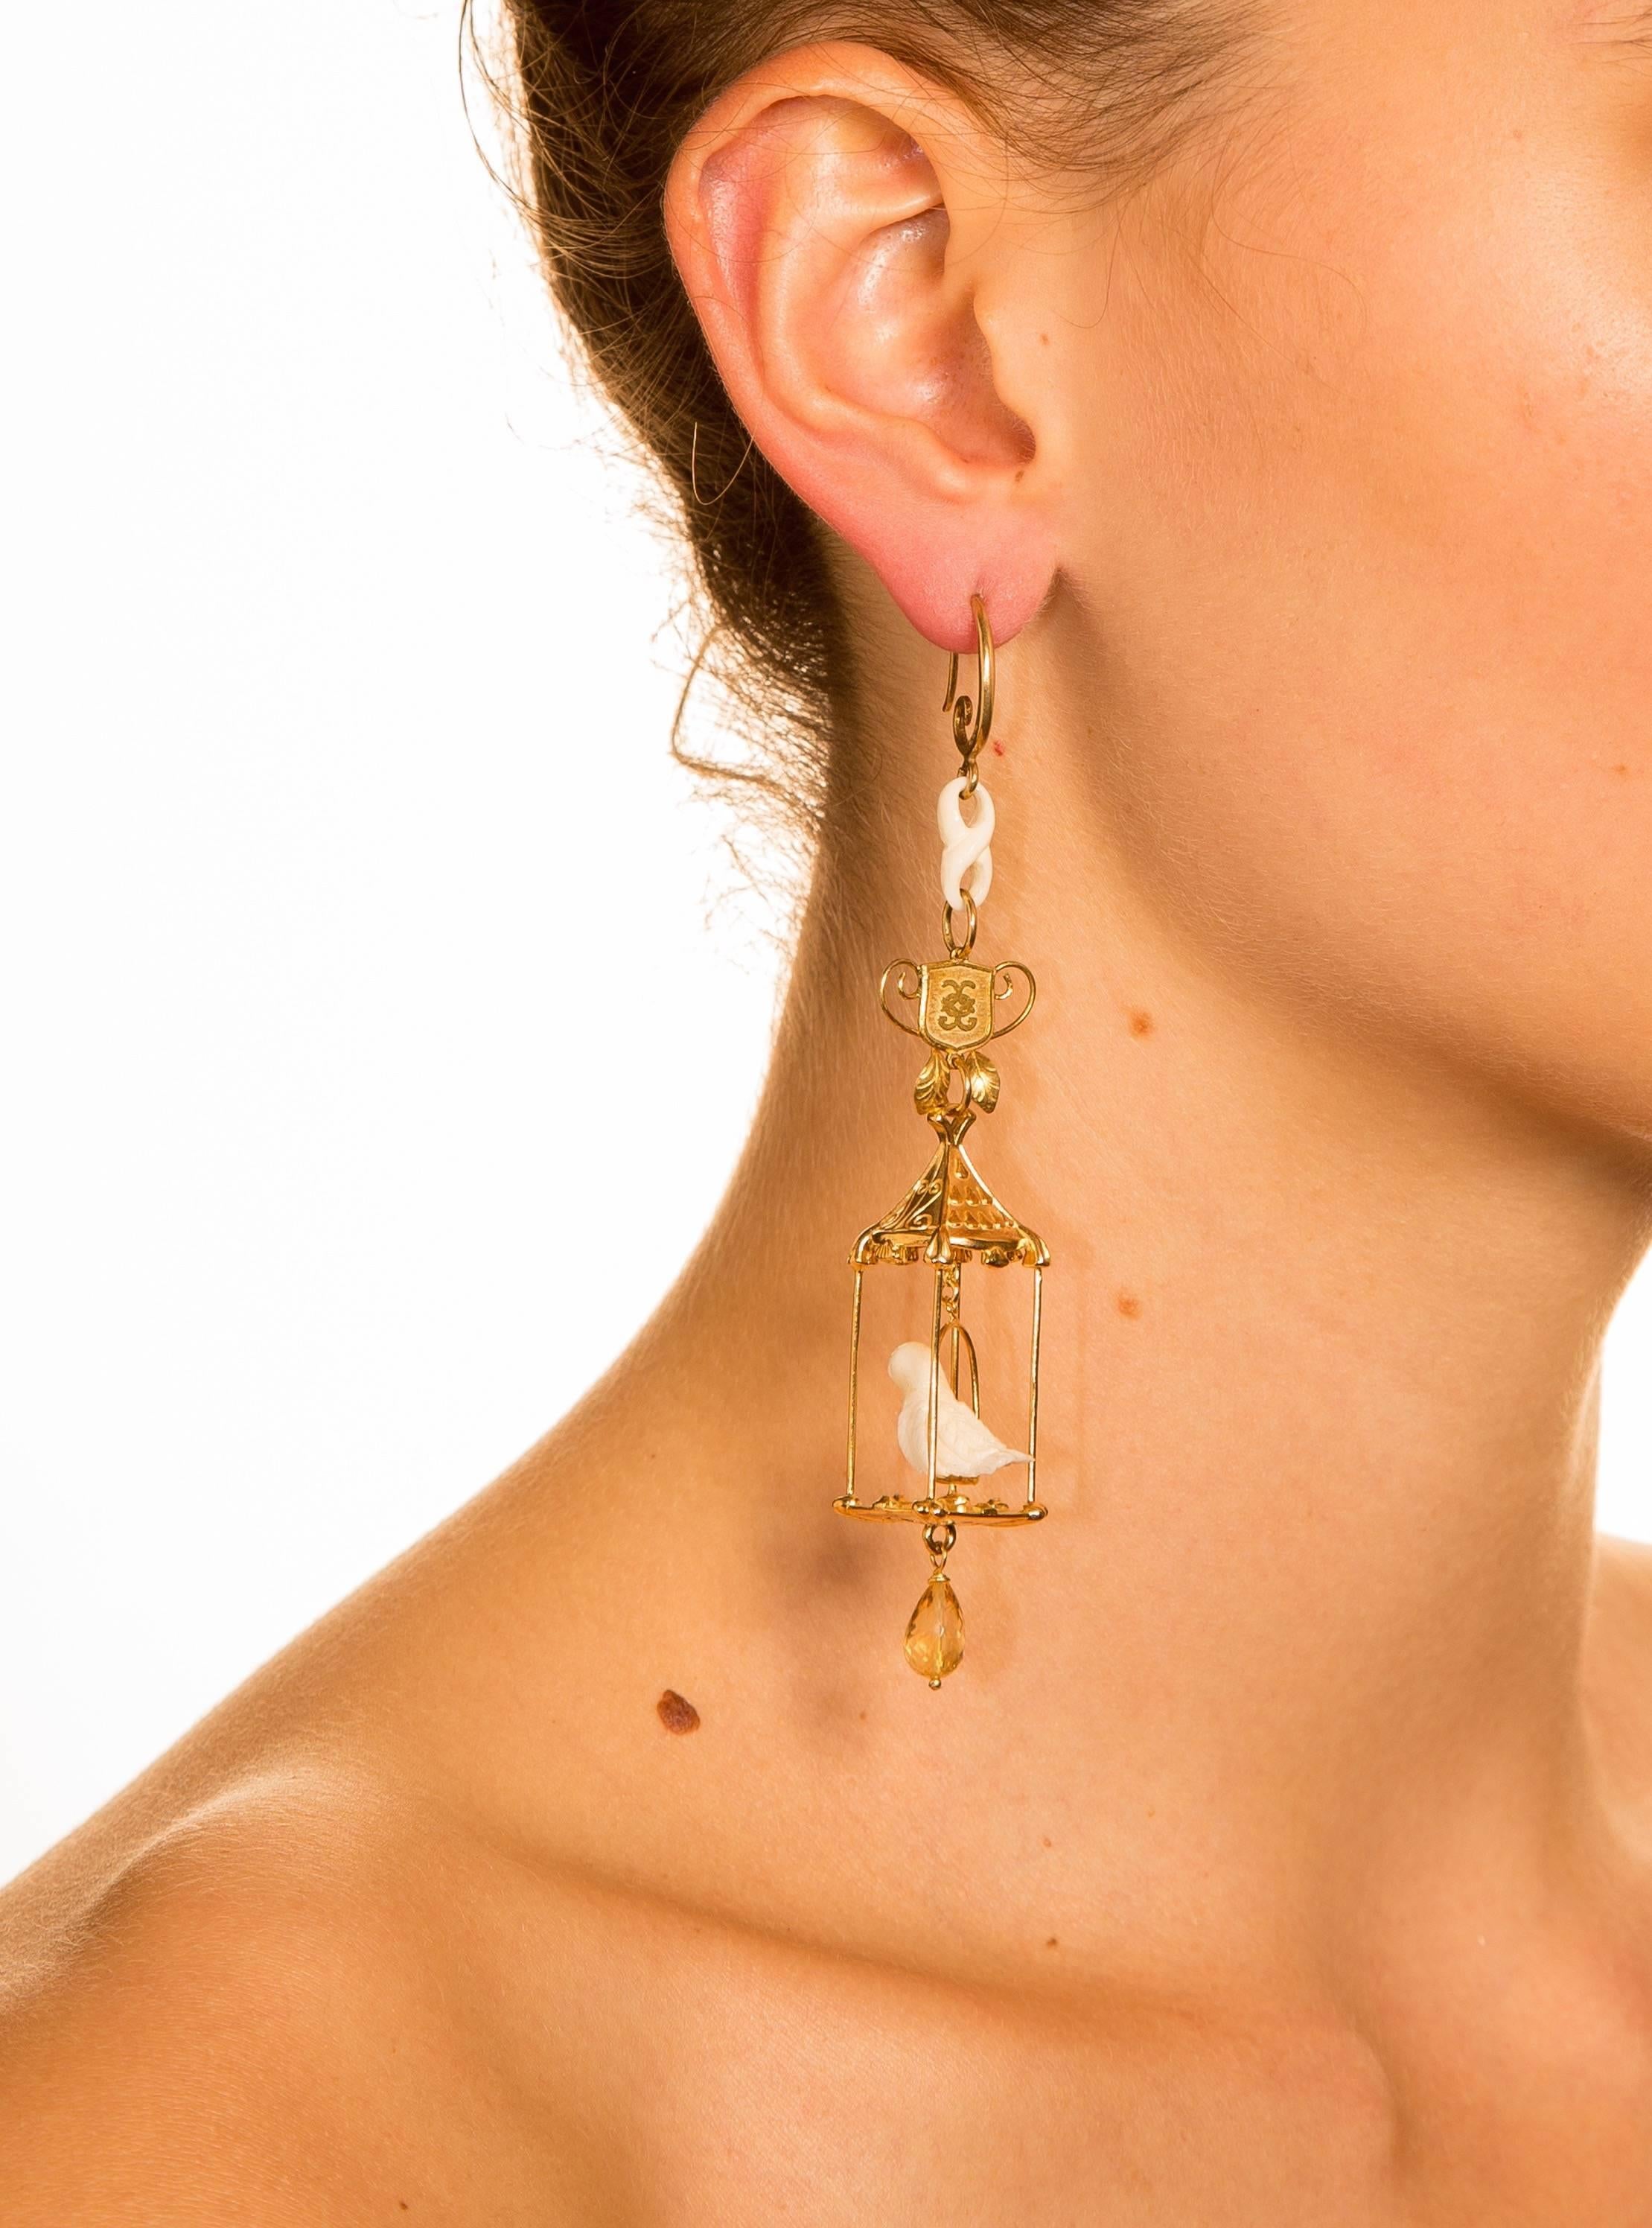 Lovingly crafted by master Italian artists and goldsmiths, these gilded bird cage earrings are exquisite works of wearable art.

The songbirds are delicately hand sculpted. The CdG shield is evocative of Medieval heraldry. 

Special Requests: For